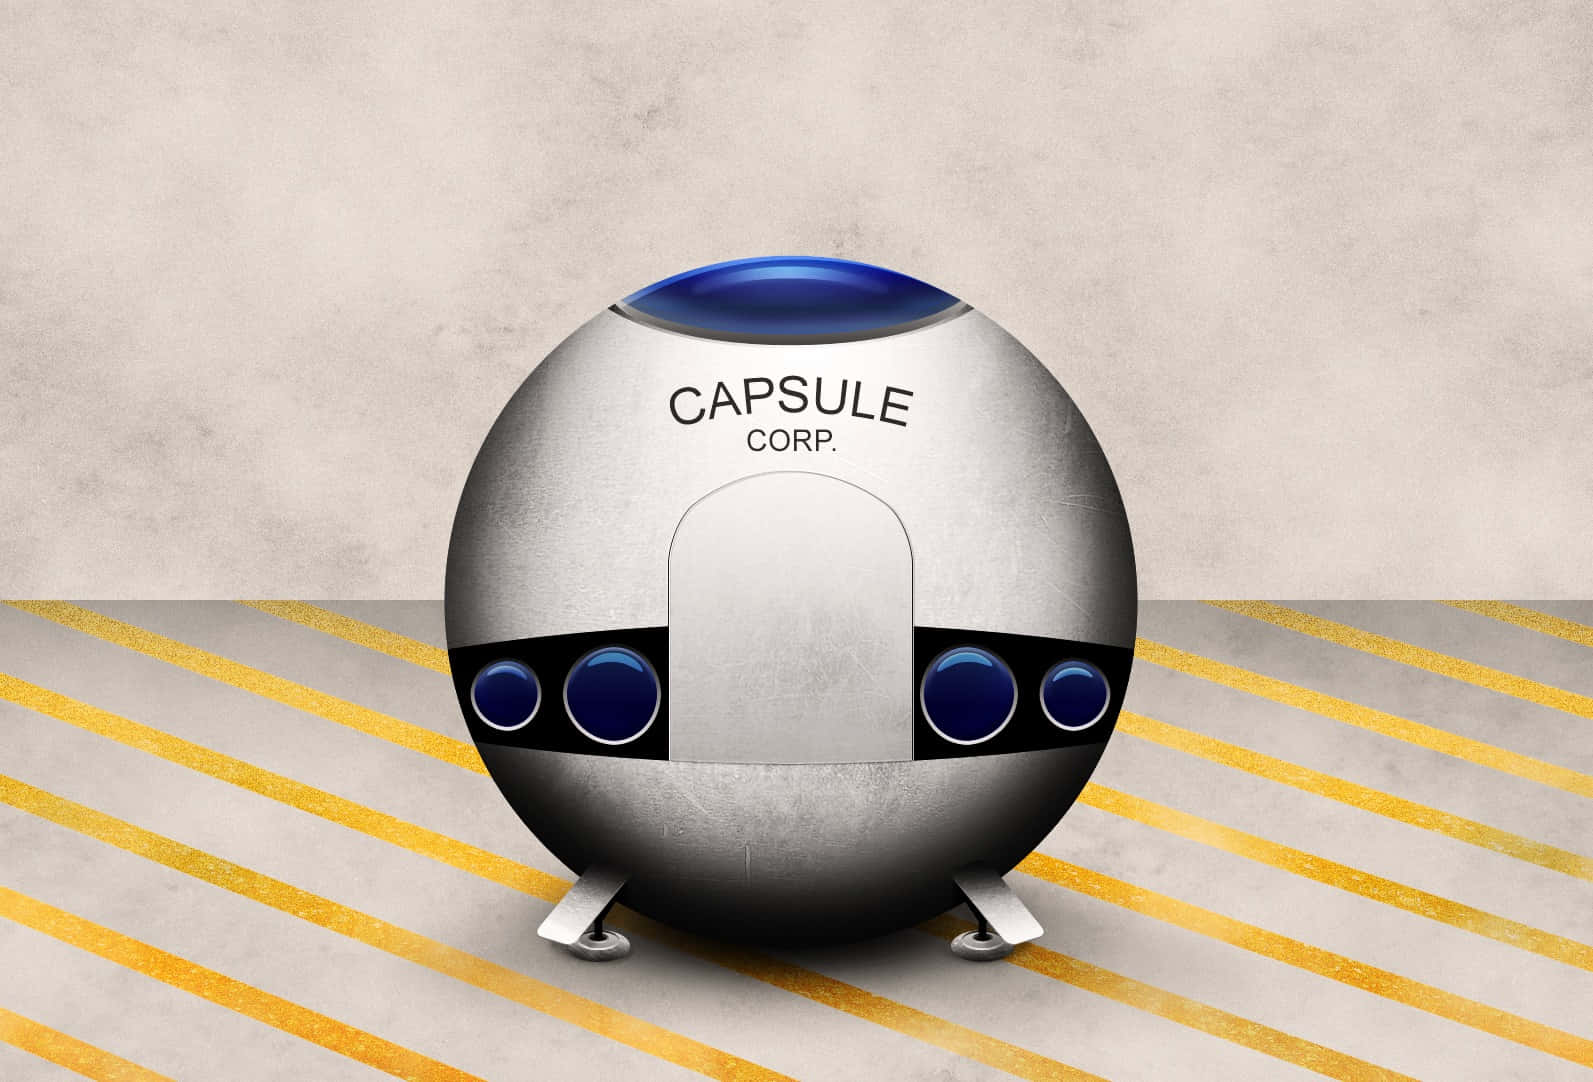 Welcome to Capsule Corp, the futuristic home of innovation and discovery. Wallpaper